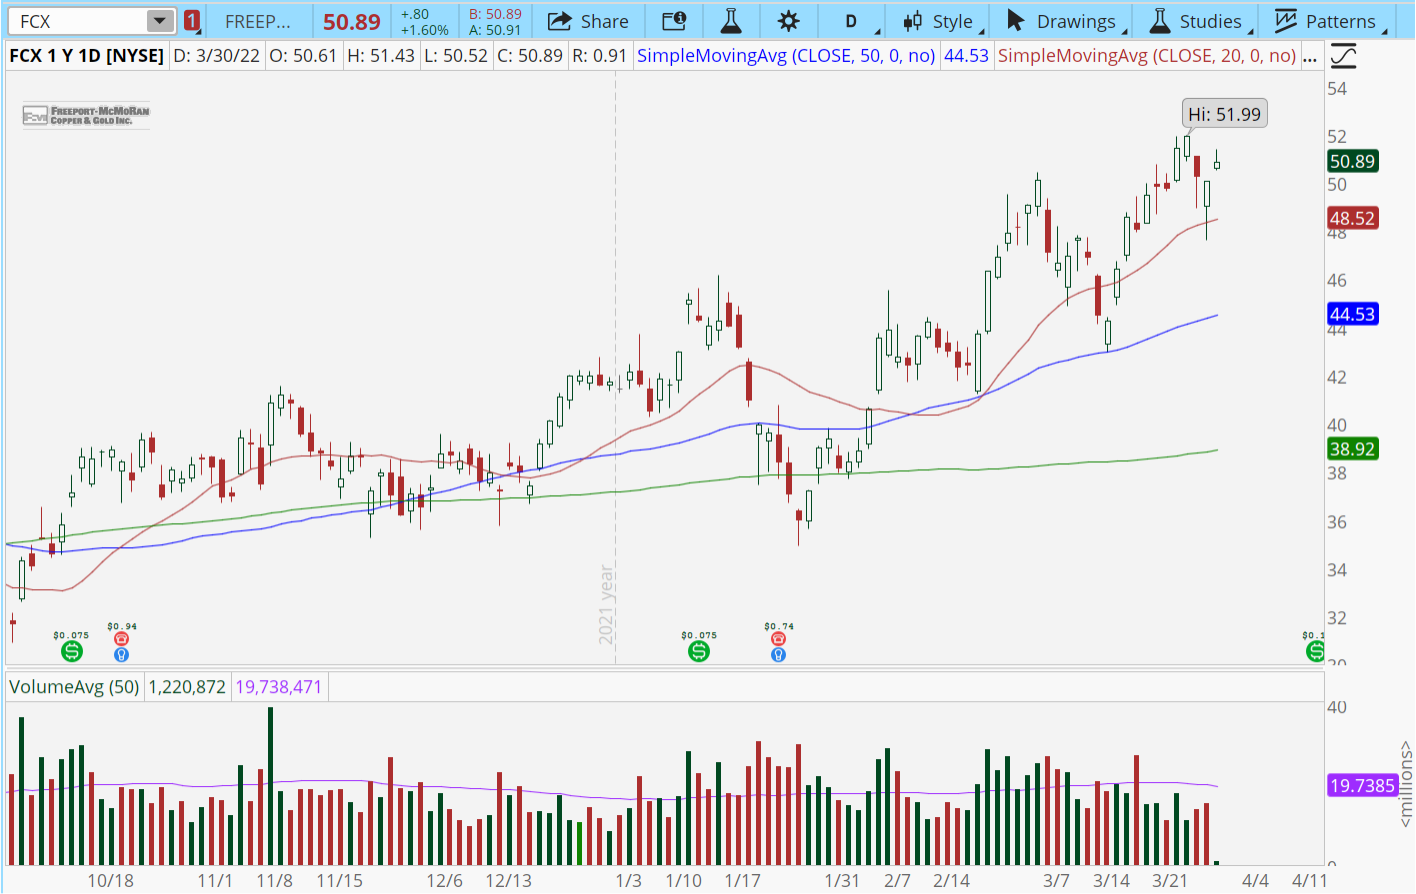 Chart of the Day: Freeport-McMoran ($FCX)